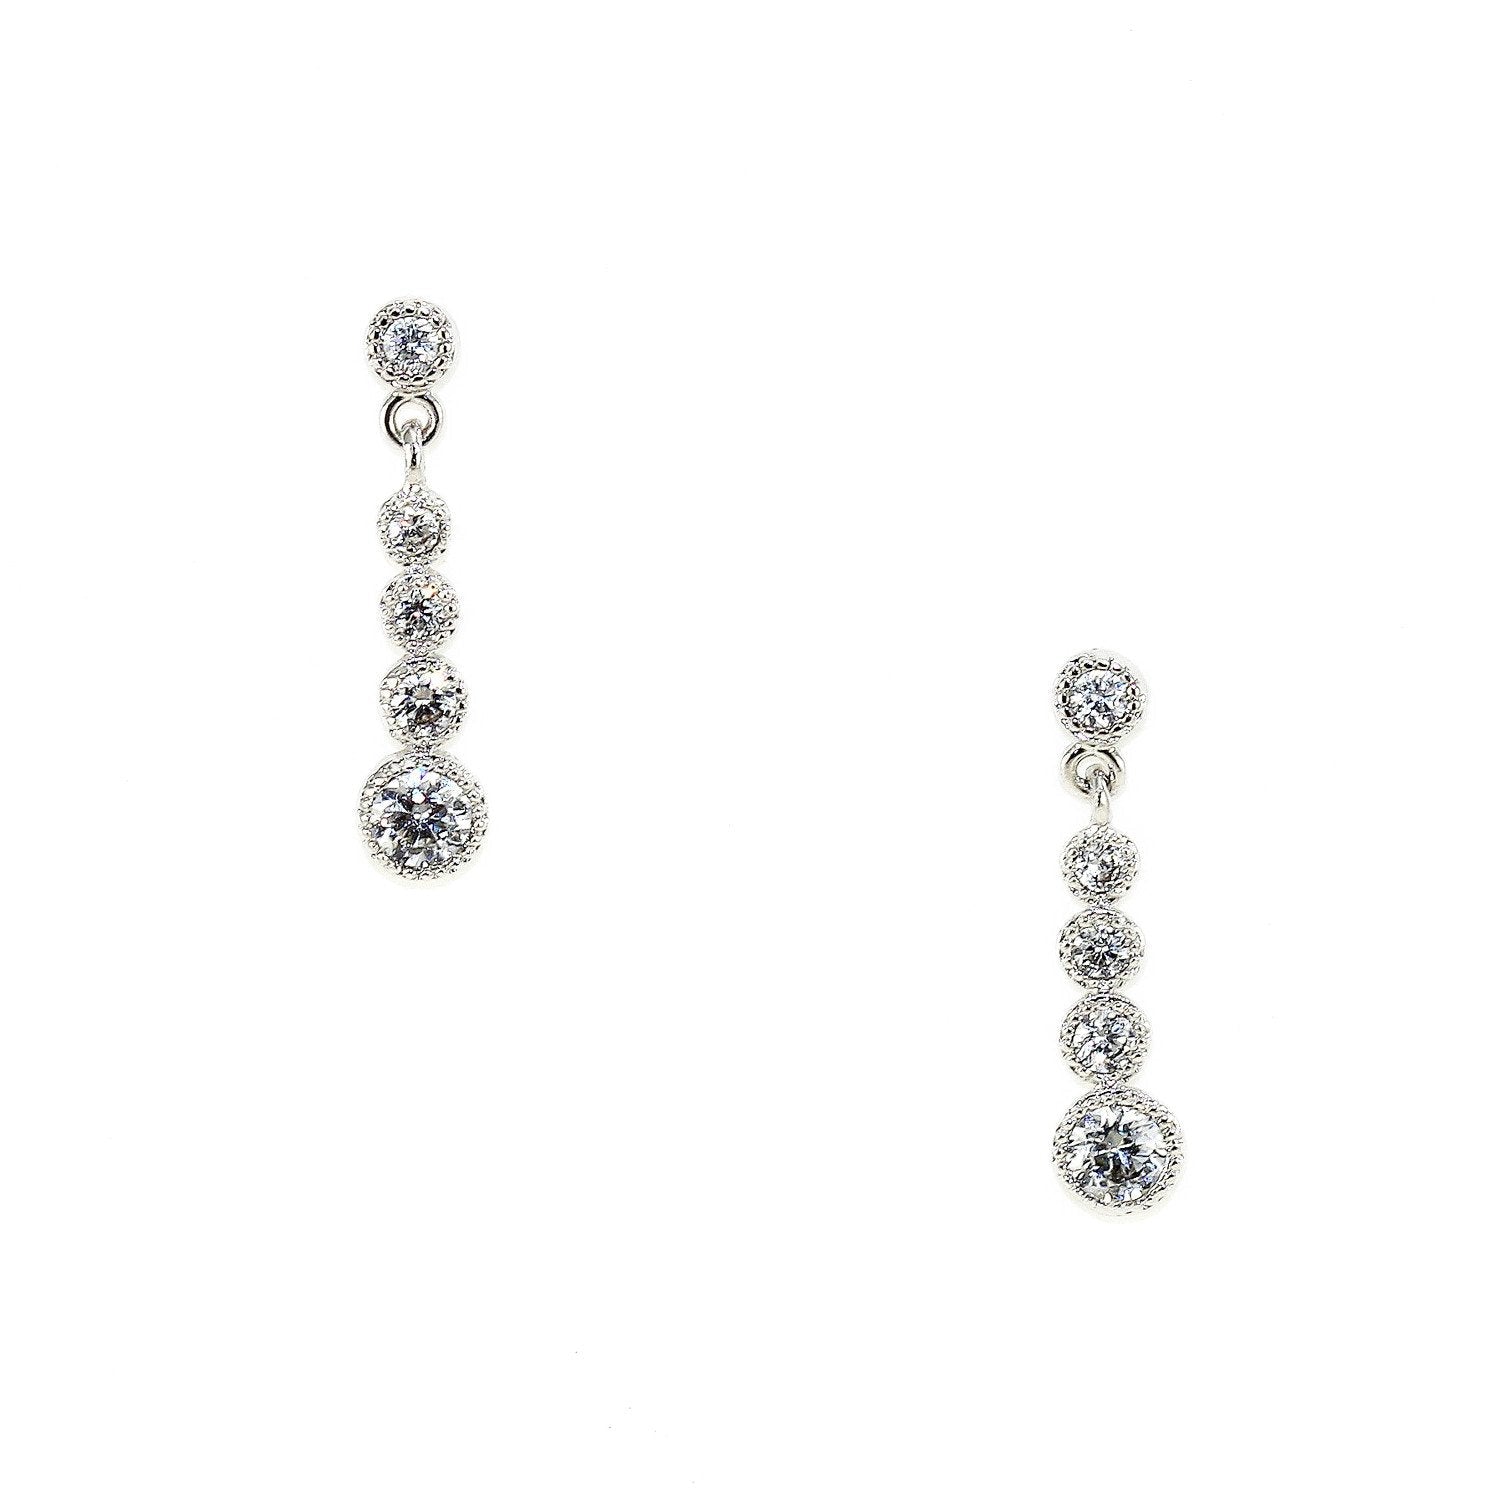 Dainty Crystal Earrings | White Gold Plated | Hypoallergenic Jewelry Bijou Her